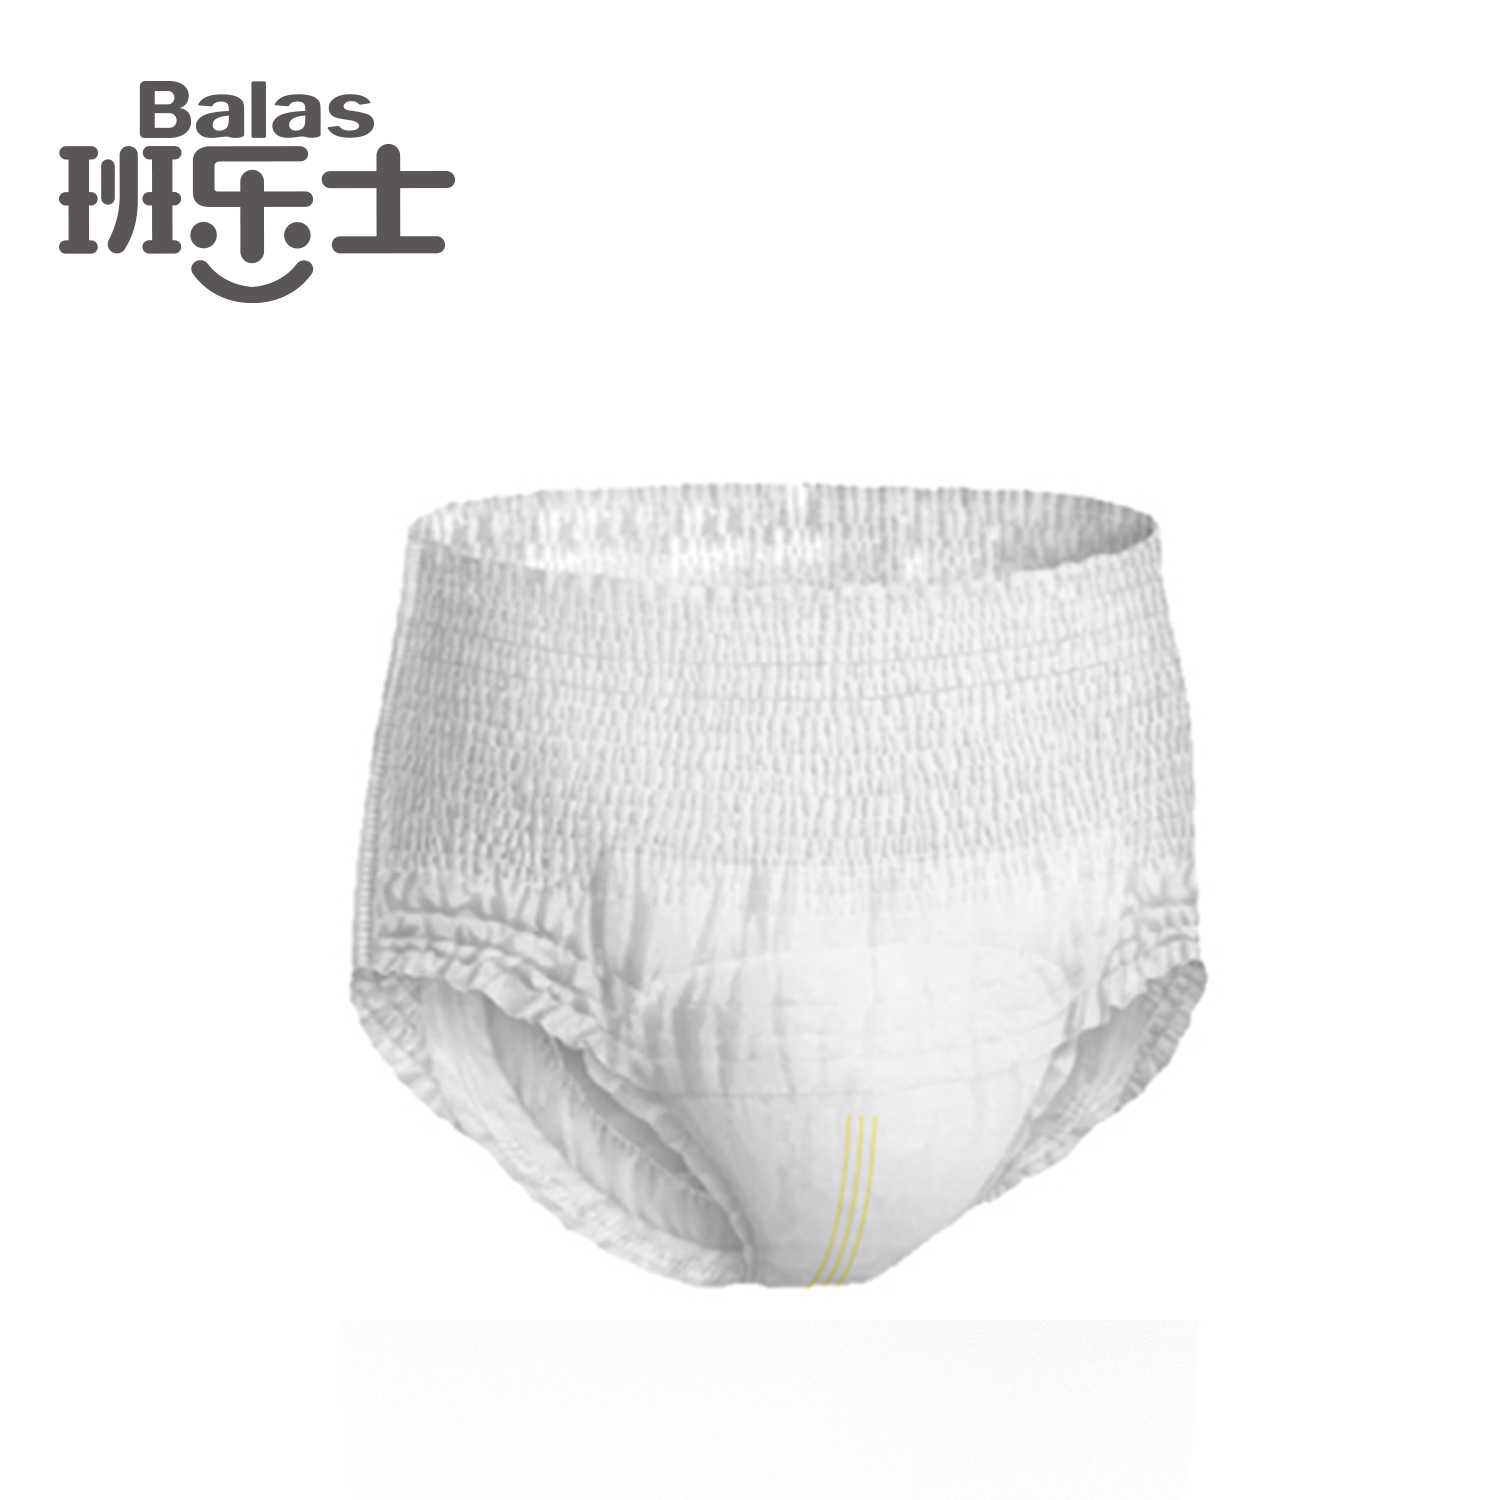 OEM Chiaus balas adult underwear diapers pull up pants overnight